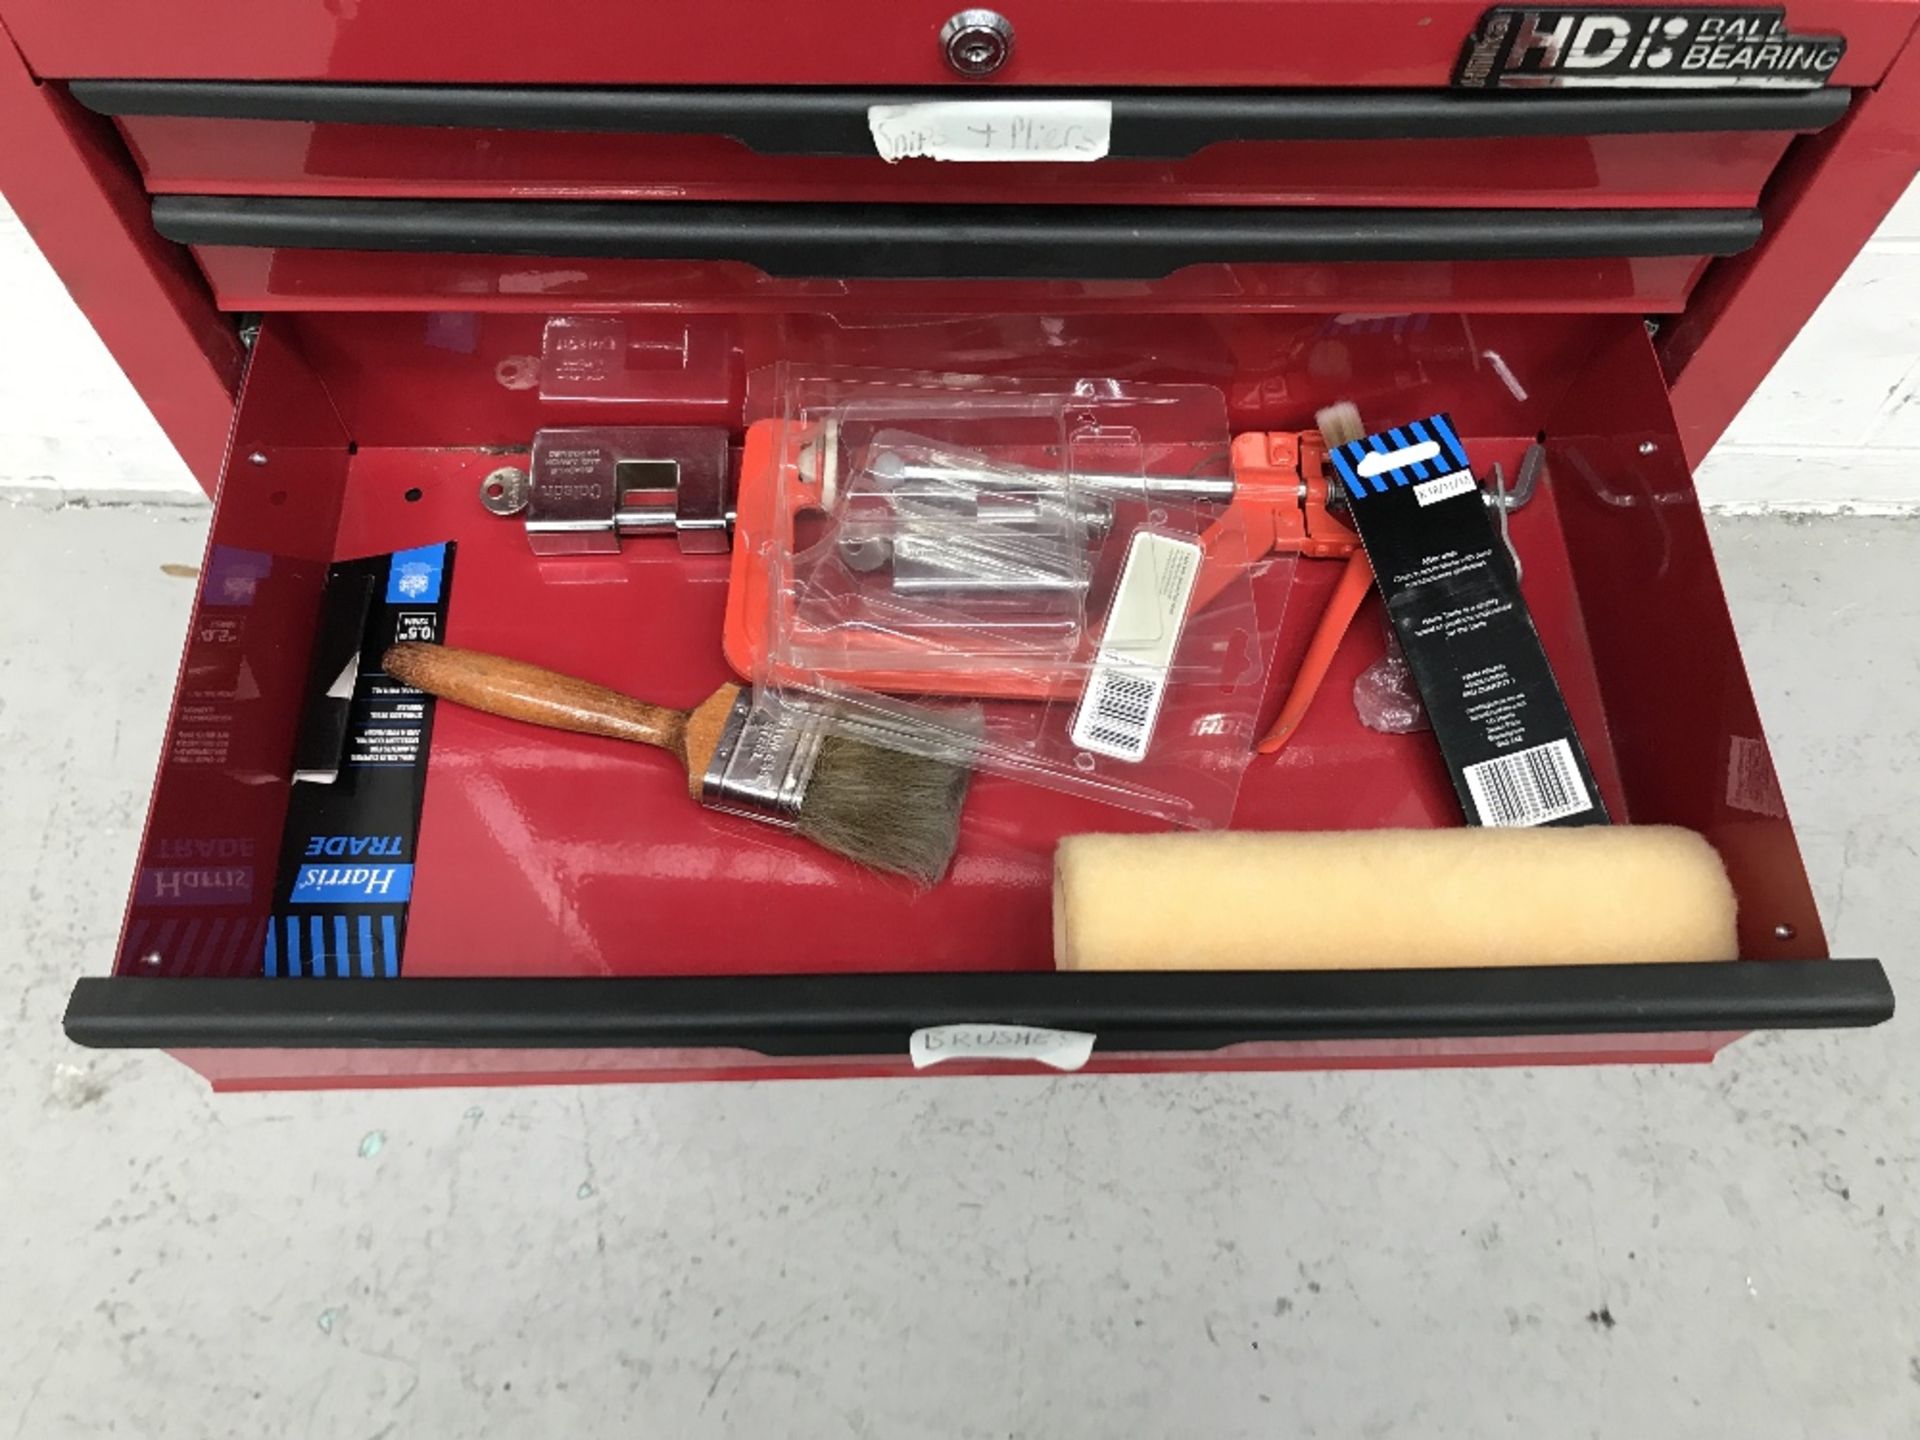 Hilka HD Ball Bearing Tool Chest and Contents - Image 10 of 13